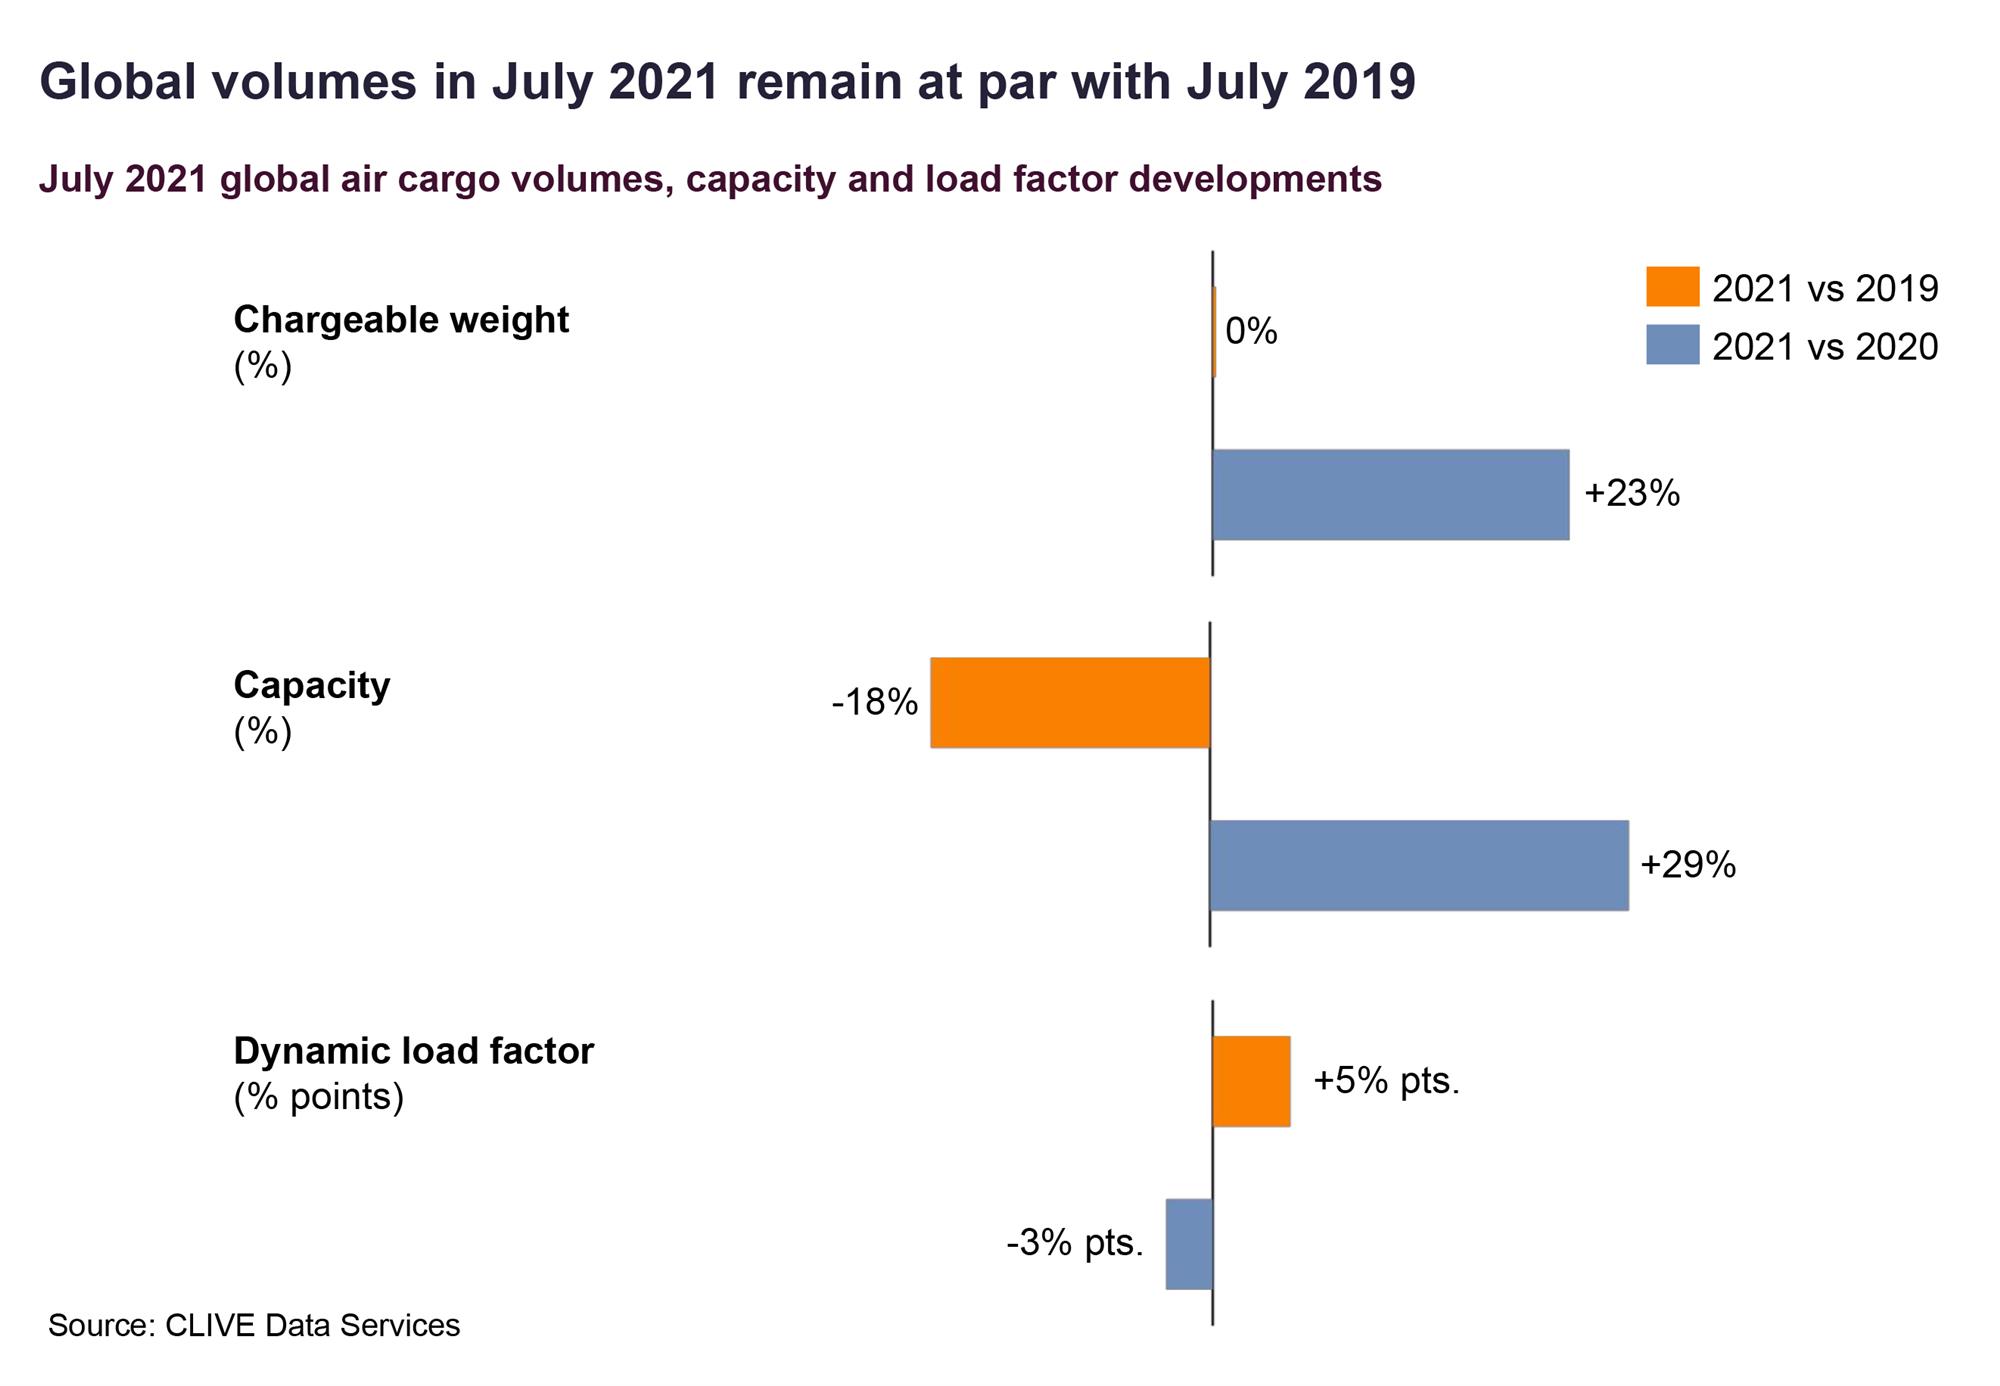 Self Photos / Files - Global volumes in July 2021 remain at par with July 2019